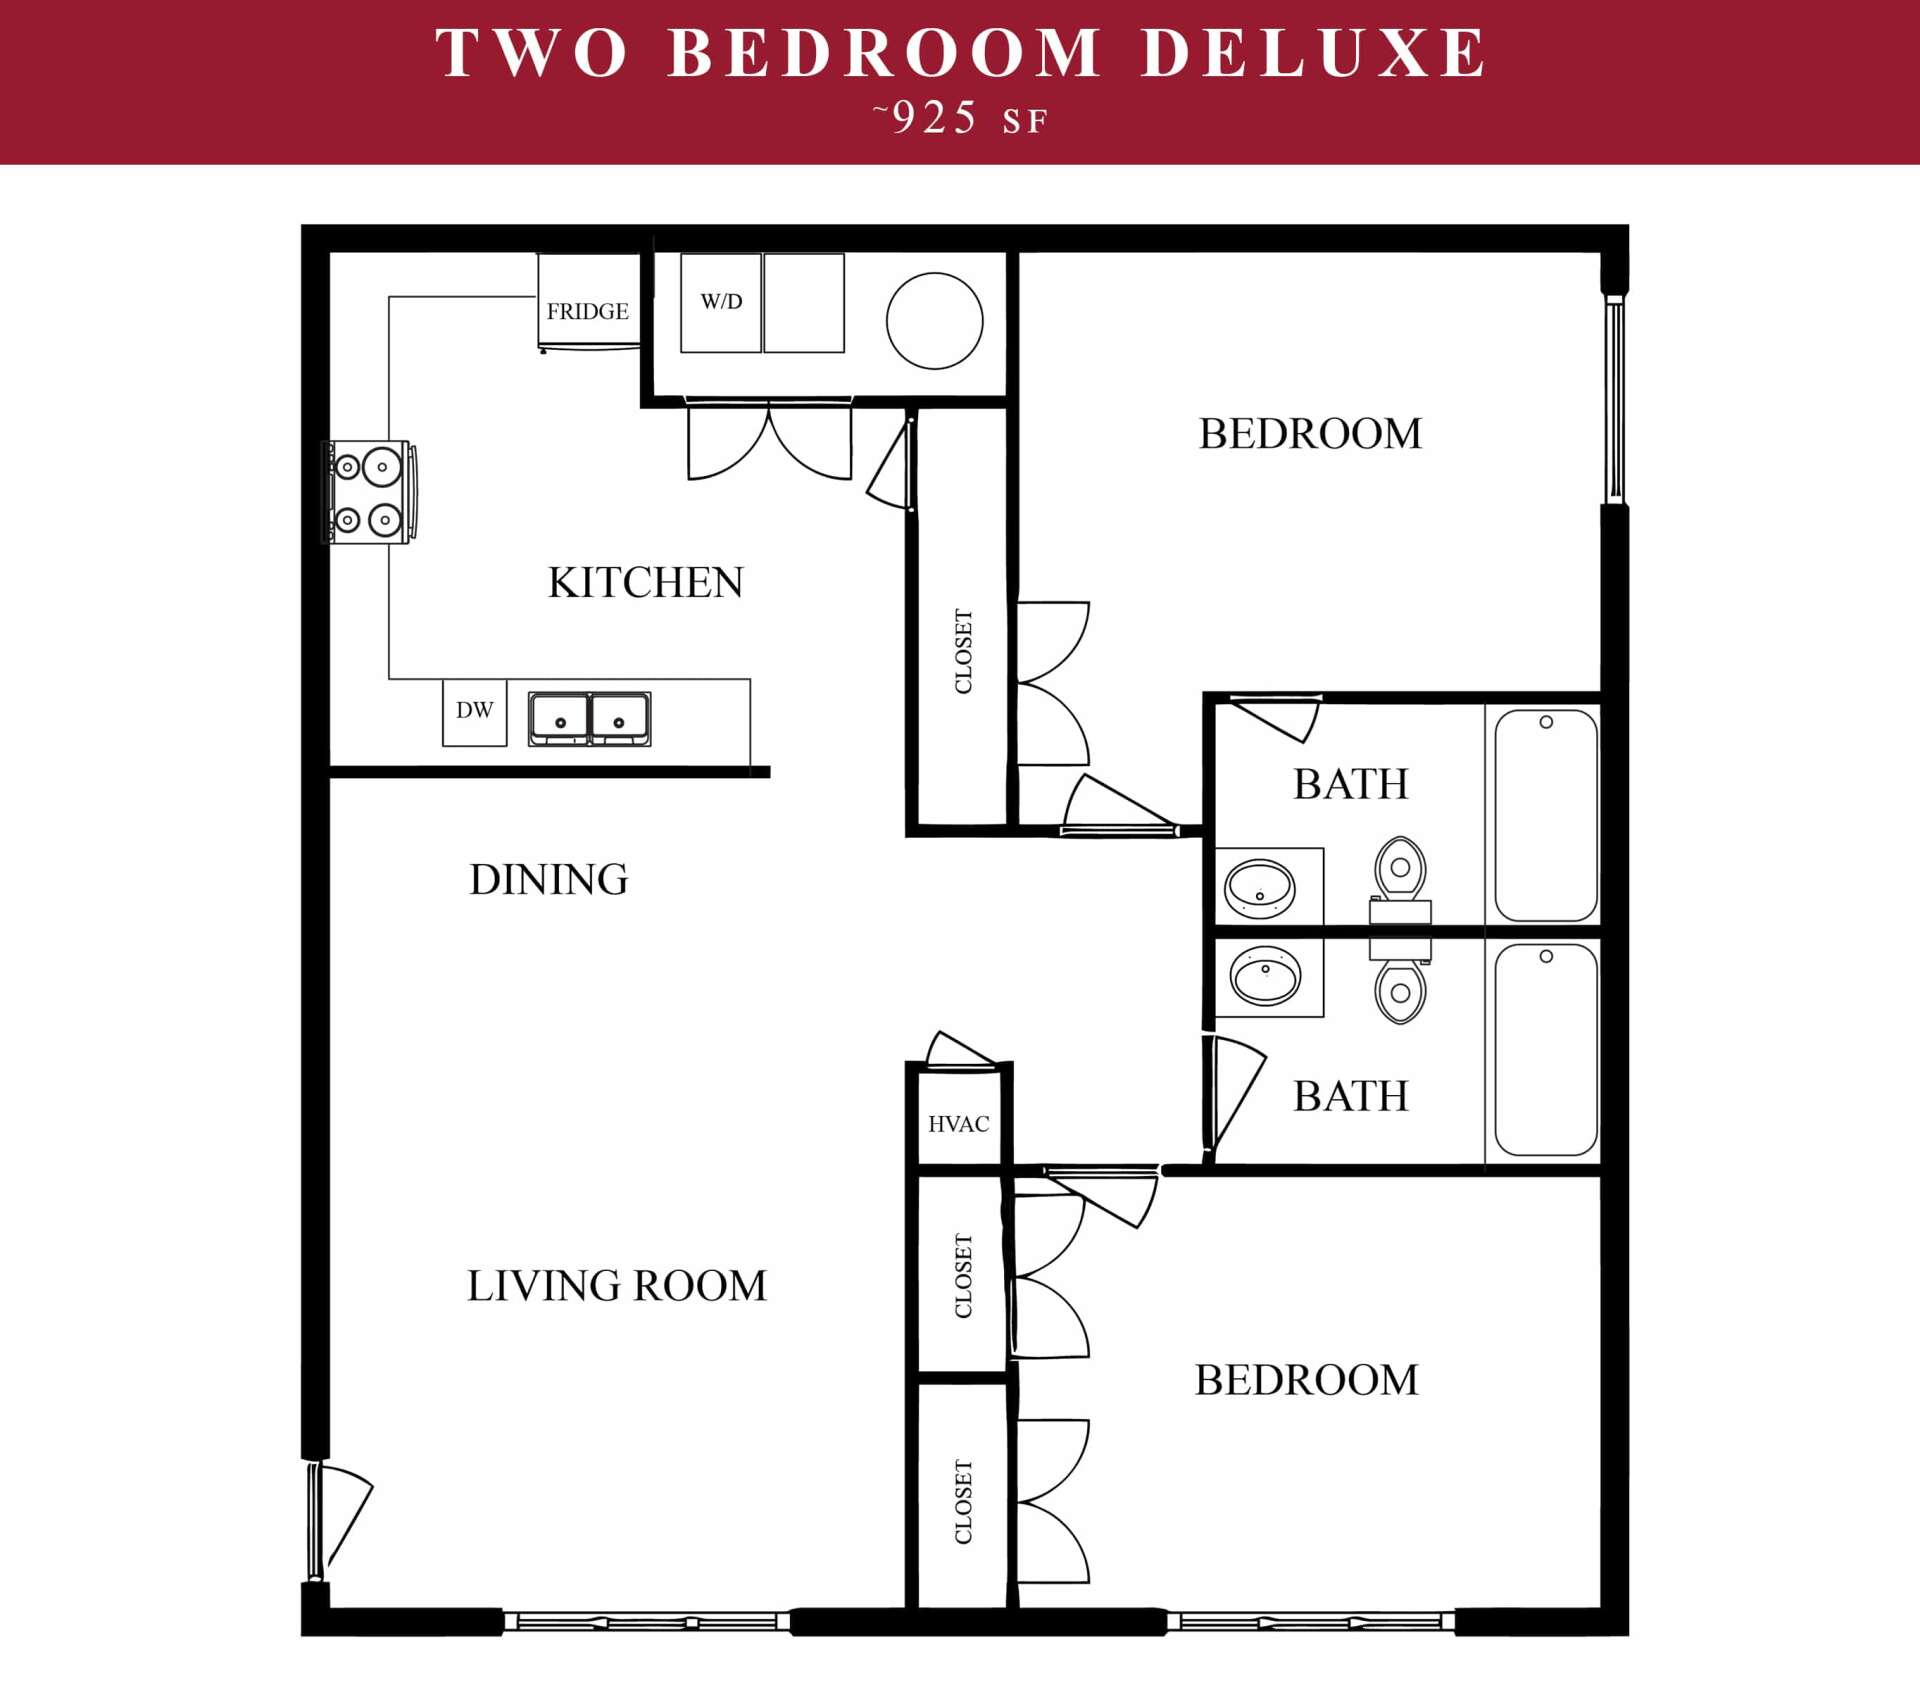 2 Bedroom Deluxe for rent in Tahlequah, OK offering 925 sq. ft of space